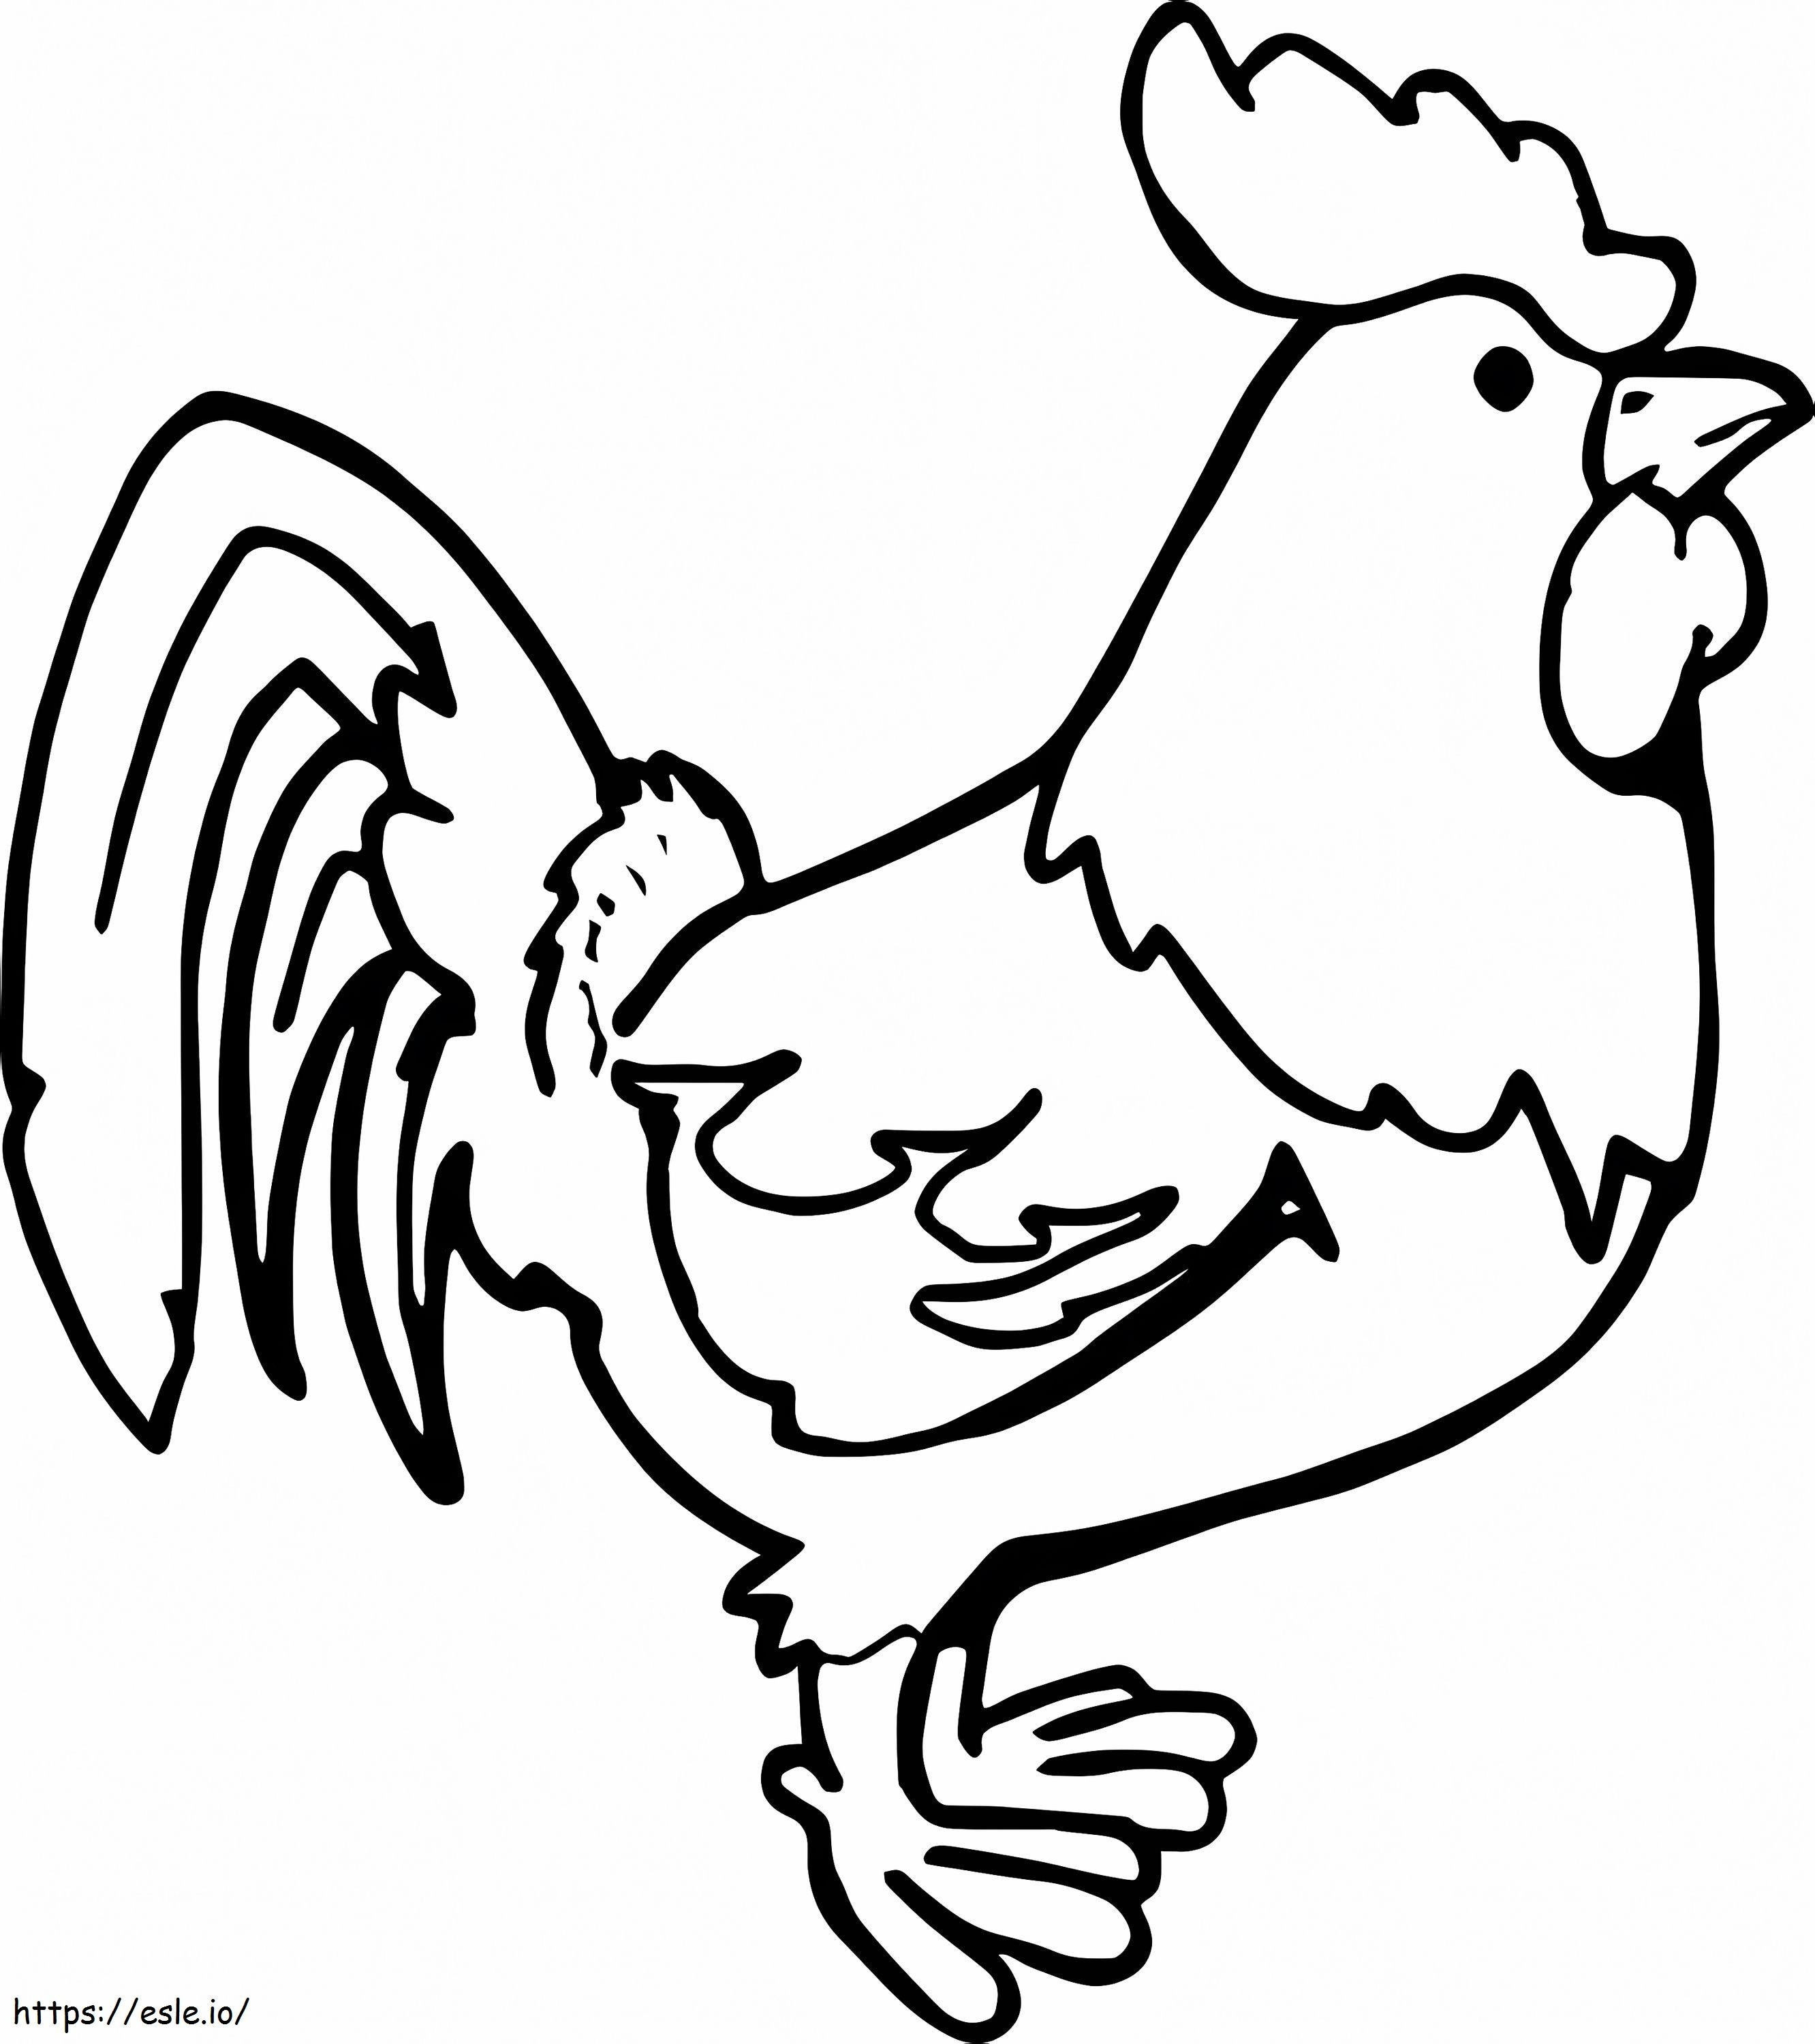 Printable Chicken coloring page